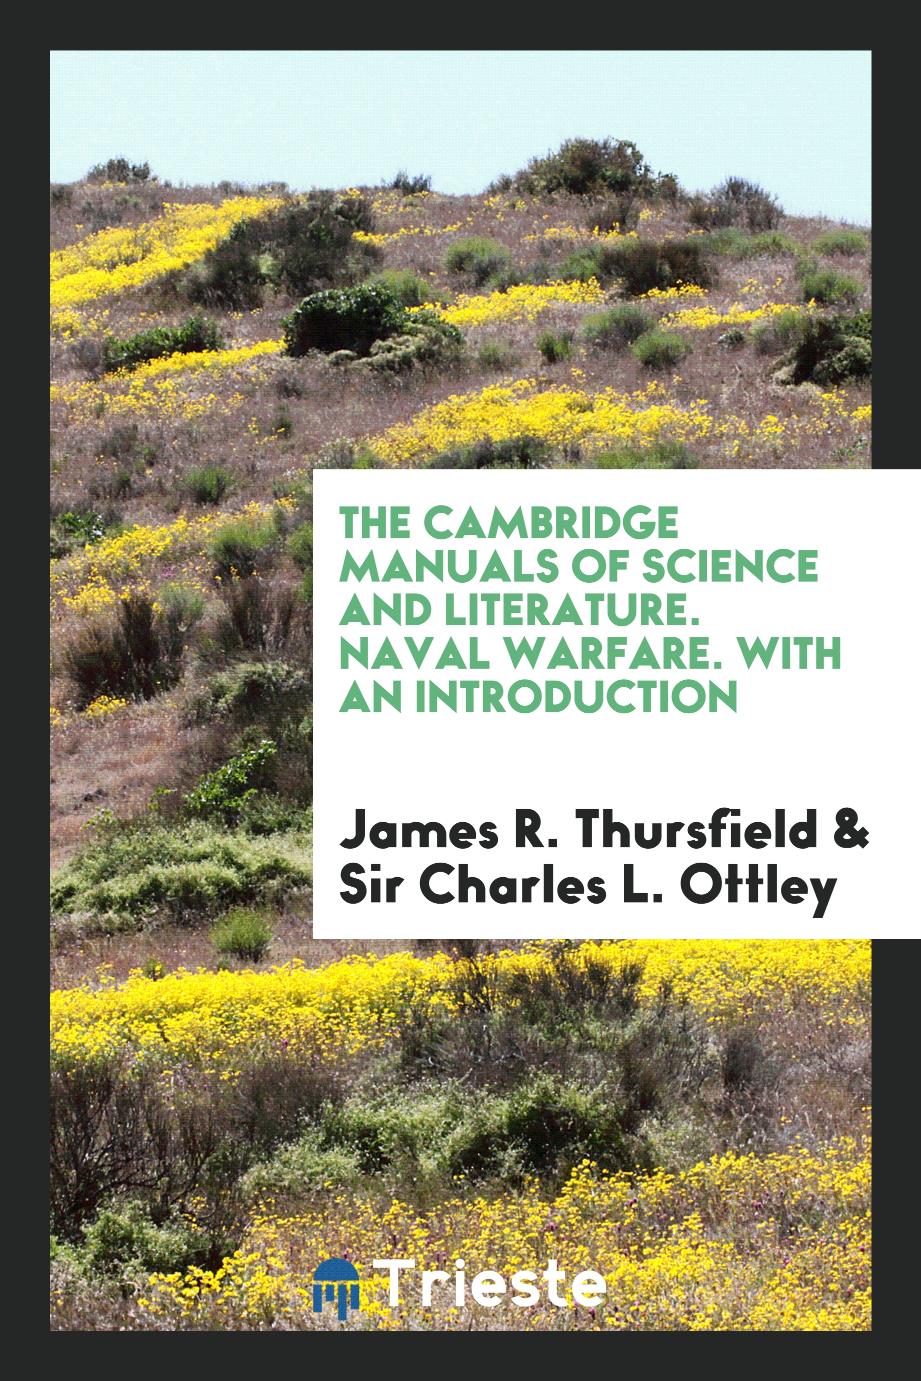 The Cambridge Manuals of Science and Literature. Naval Warfare. With an Introduction